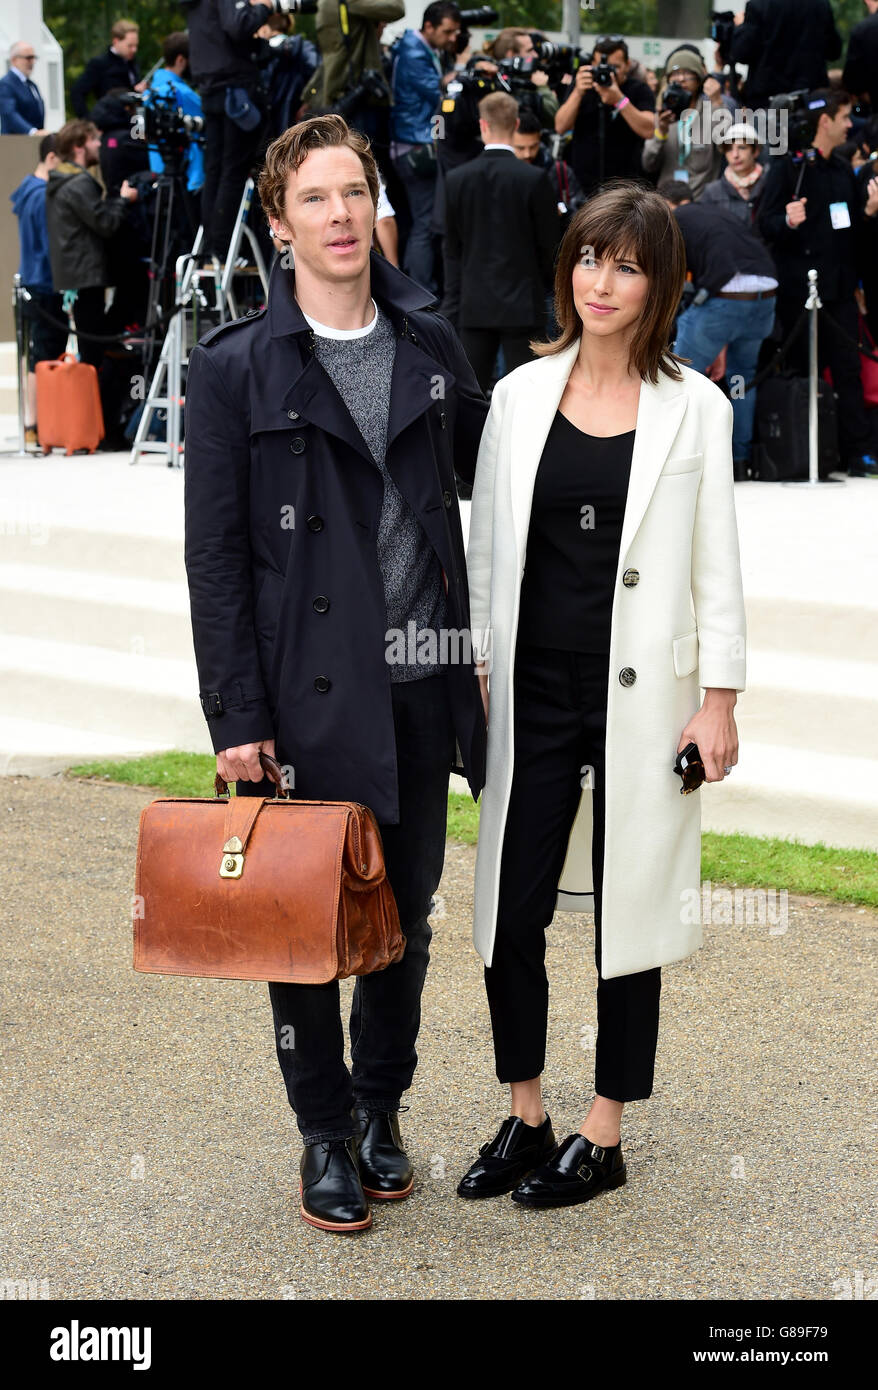 Benedict Cumberbatch and Sophie Hunter attending the Burberry Spring/Summer  2016 London Fashion Week show at Hyde Park, London. PRESS ASSOCIATION  Photo. Picture date: Monday September 21, 2015. Photo credit should read:  Ian